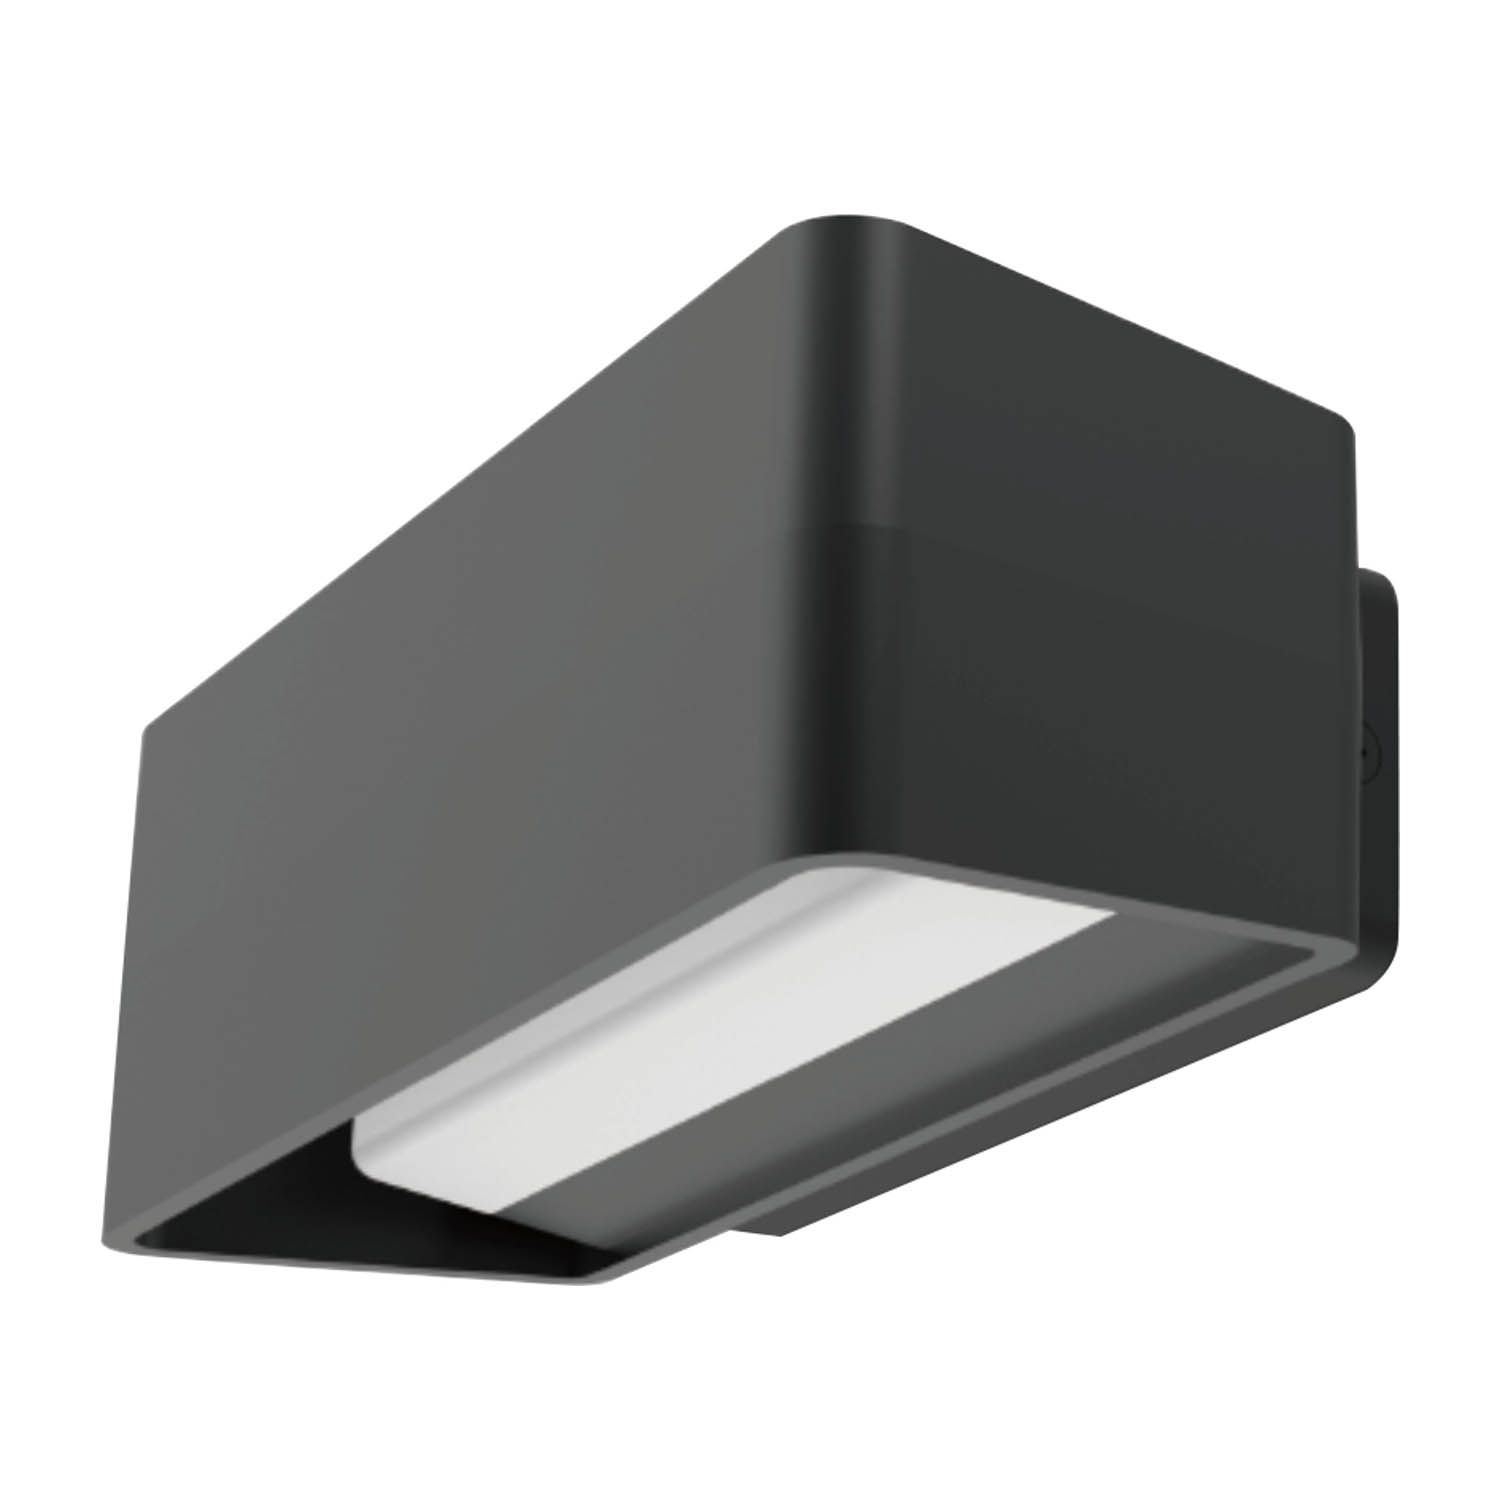 LED Cover Wall Light